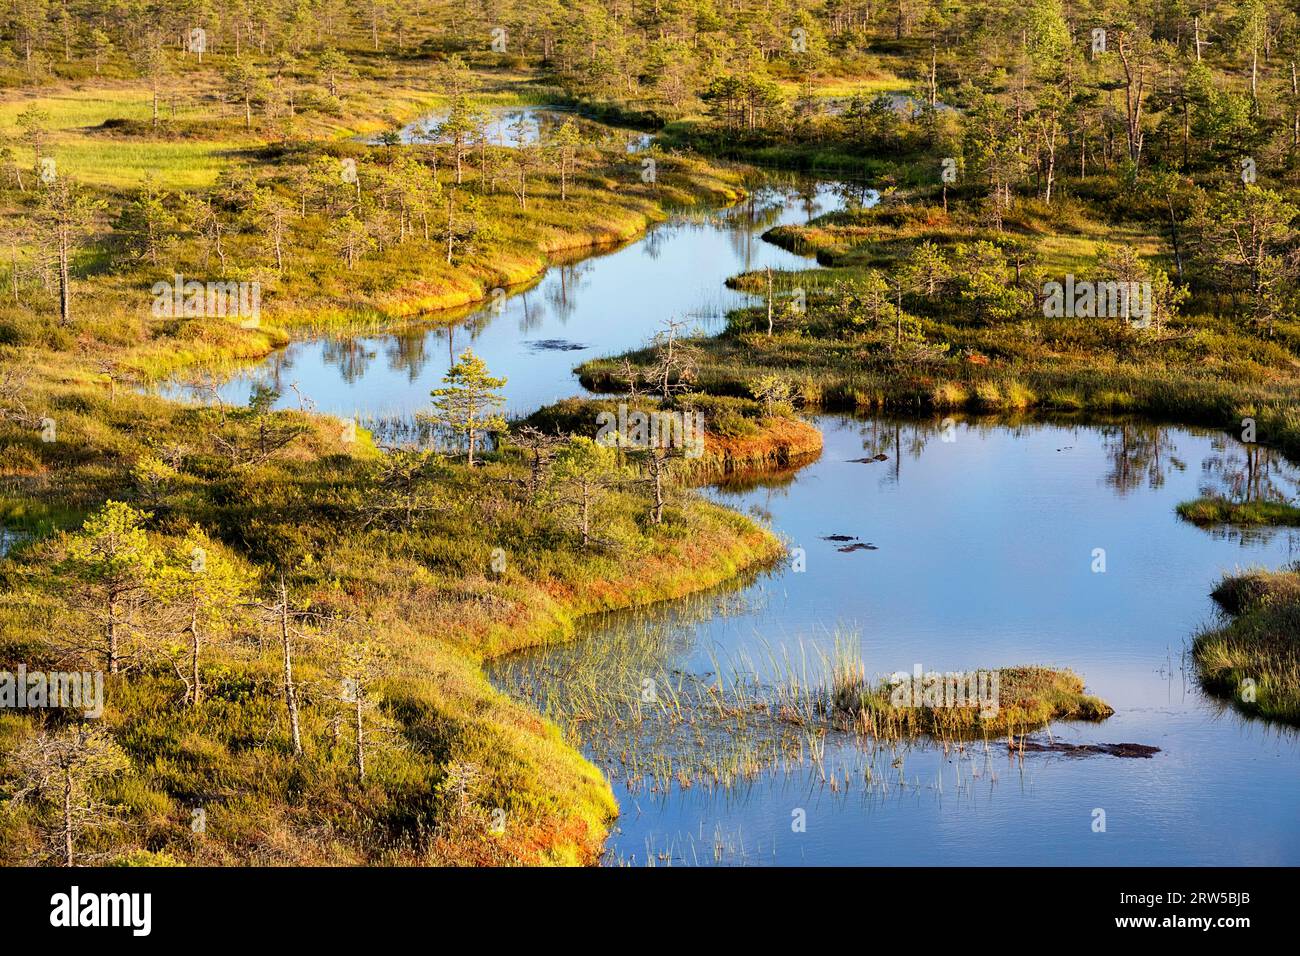 Spectacular Mannikjarve bog in Endla Nature Reserve surrounded with pools and islets with pine trees on a sunny summer day, Estonia Stock Photo